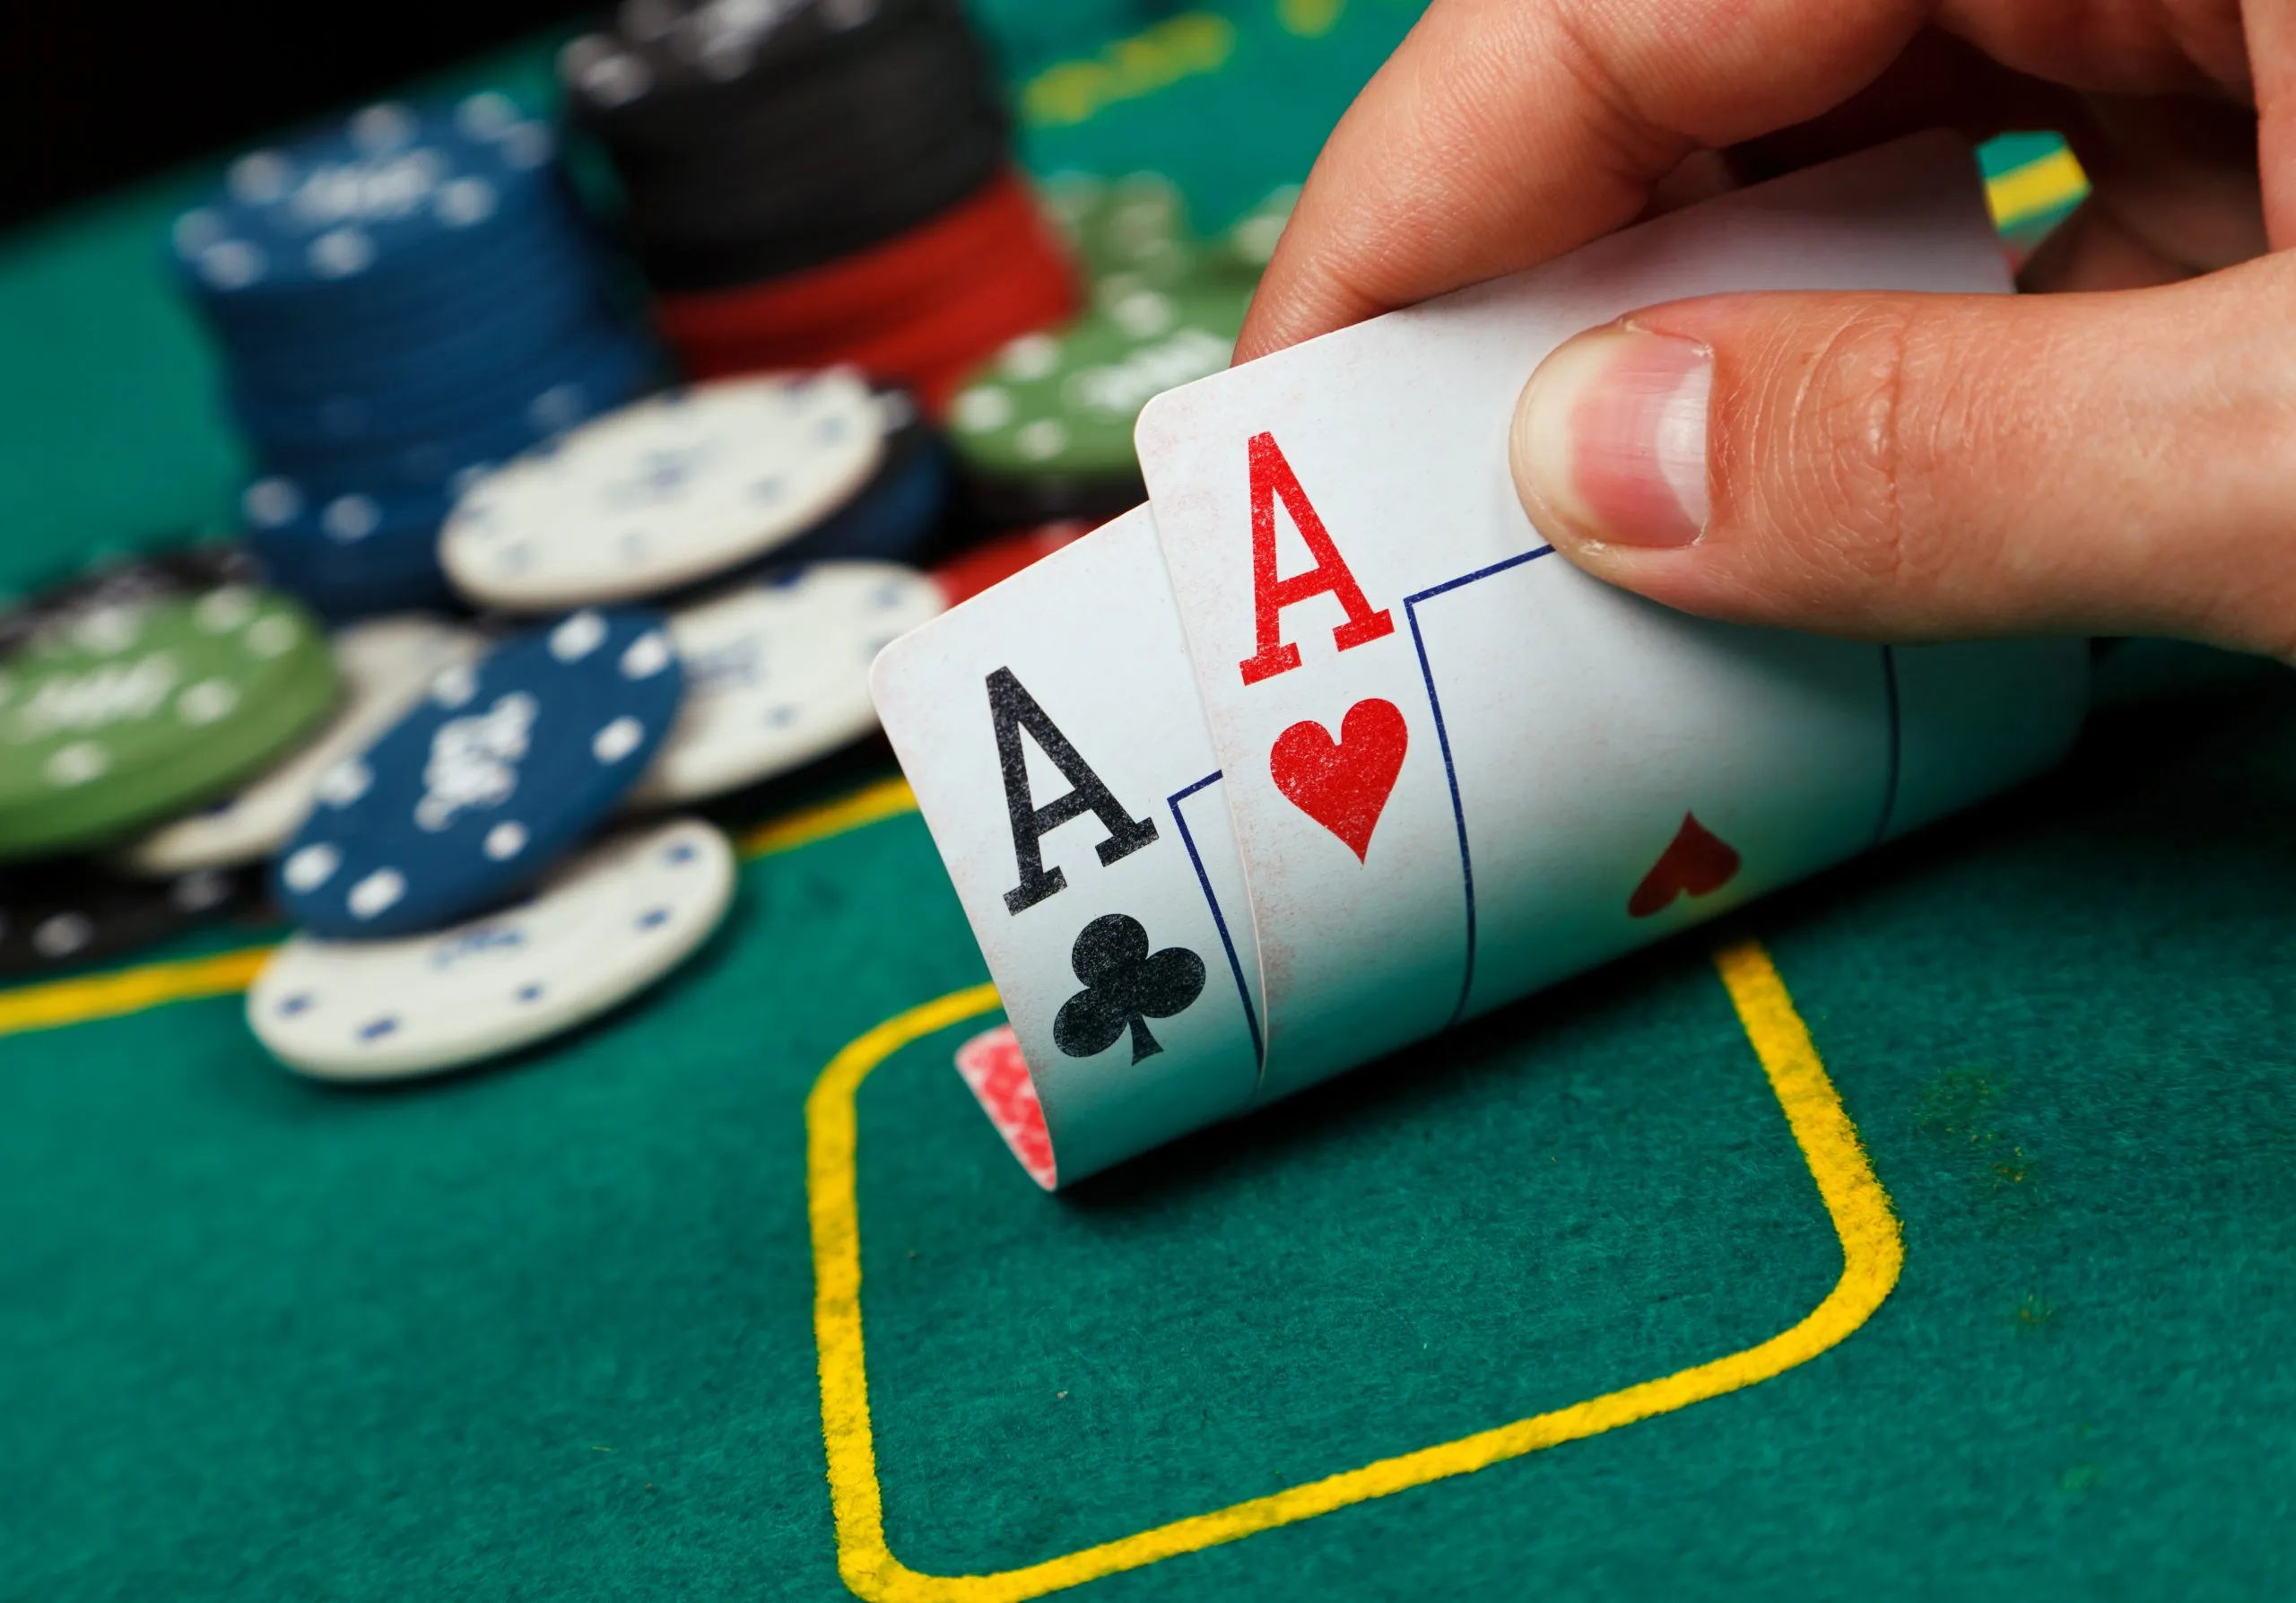 8 Common Mistakes to Avoid When Evaluating Poker Hands